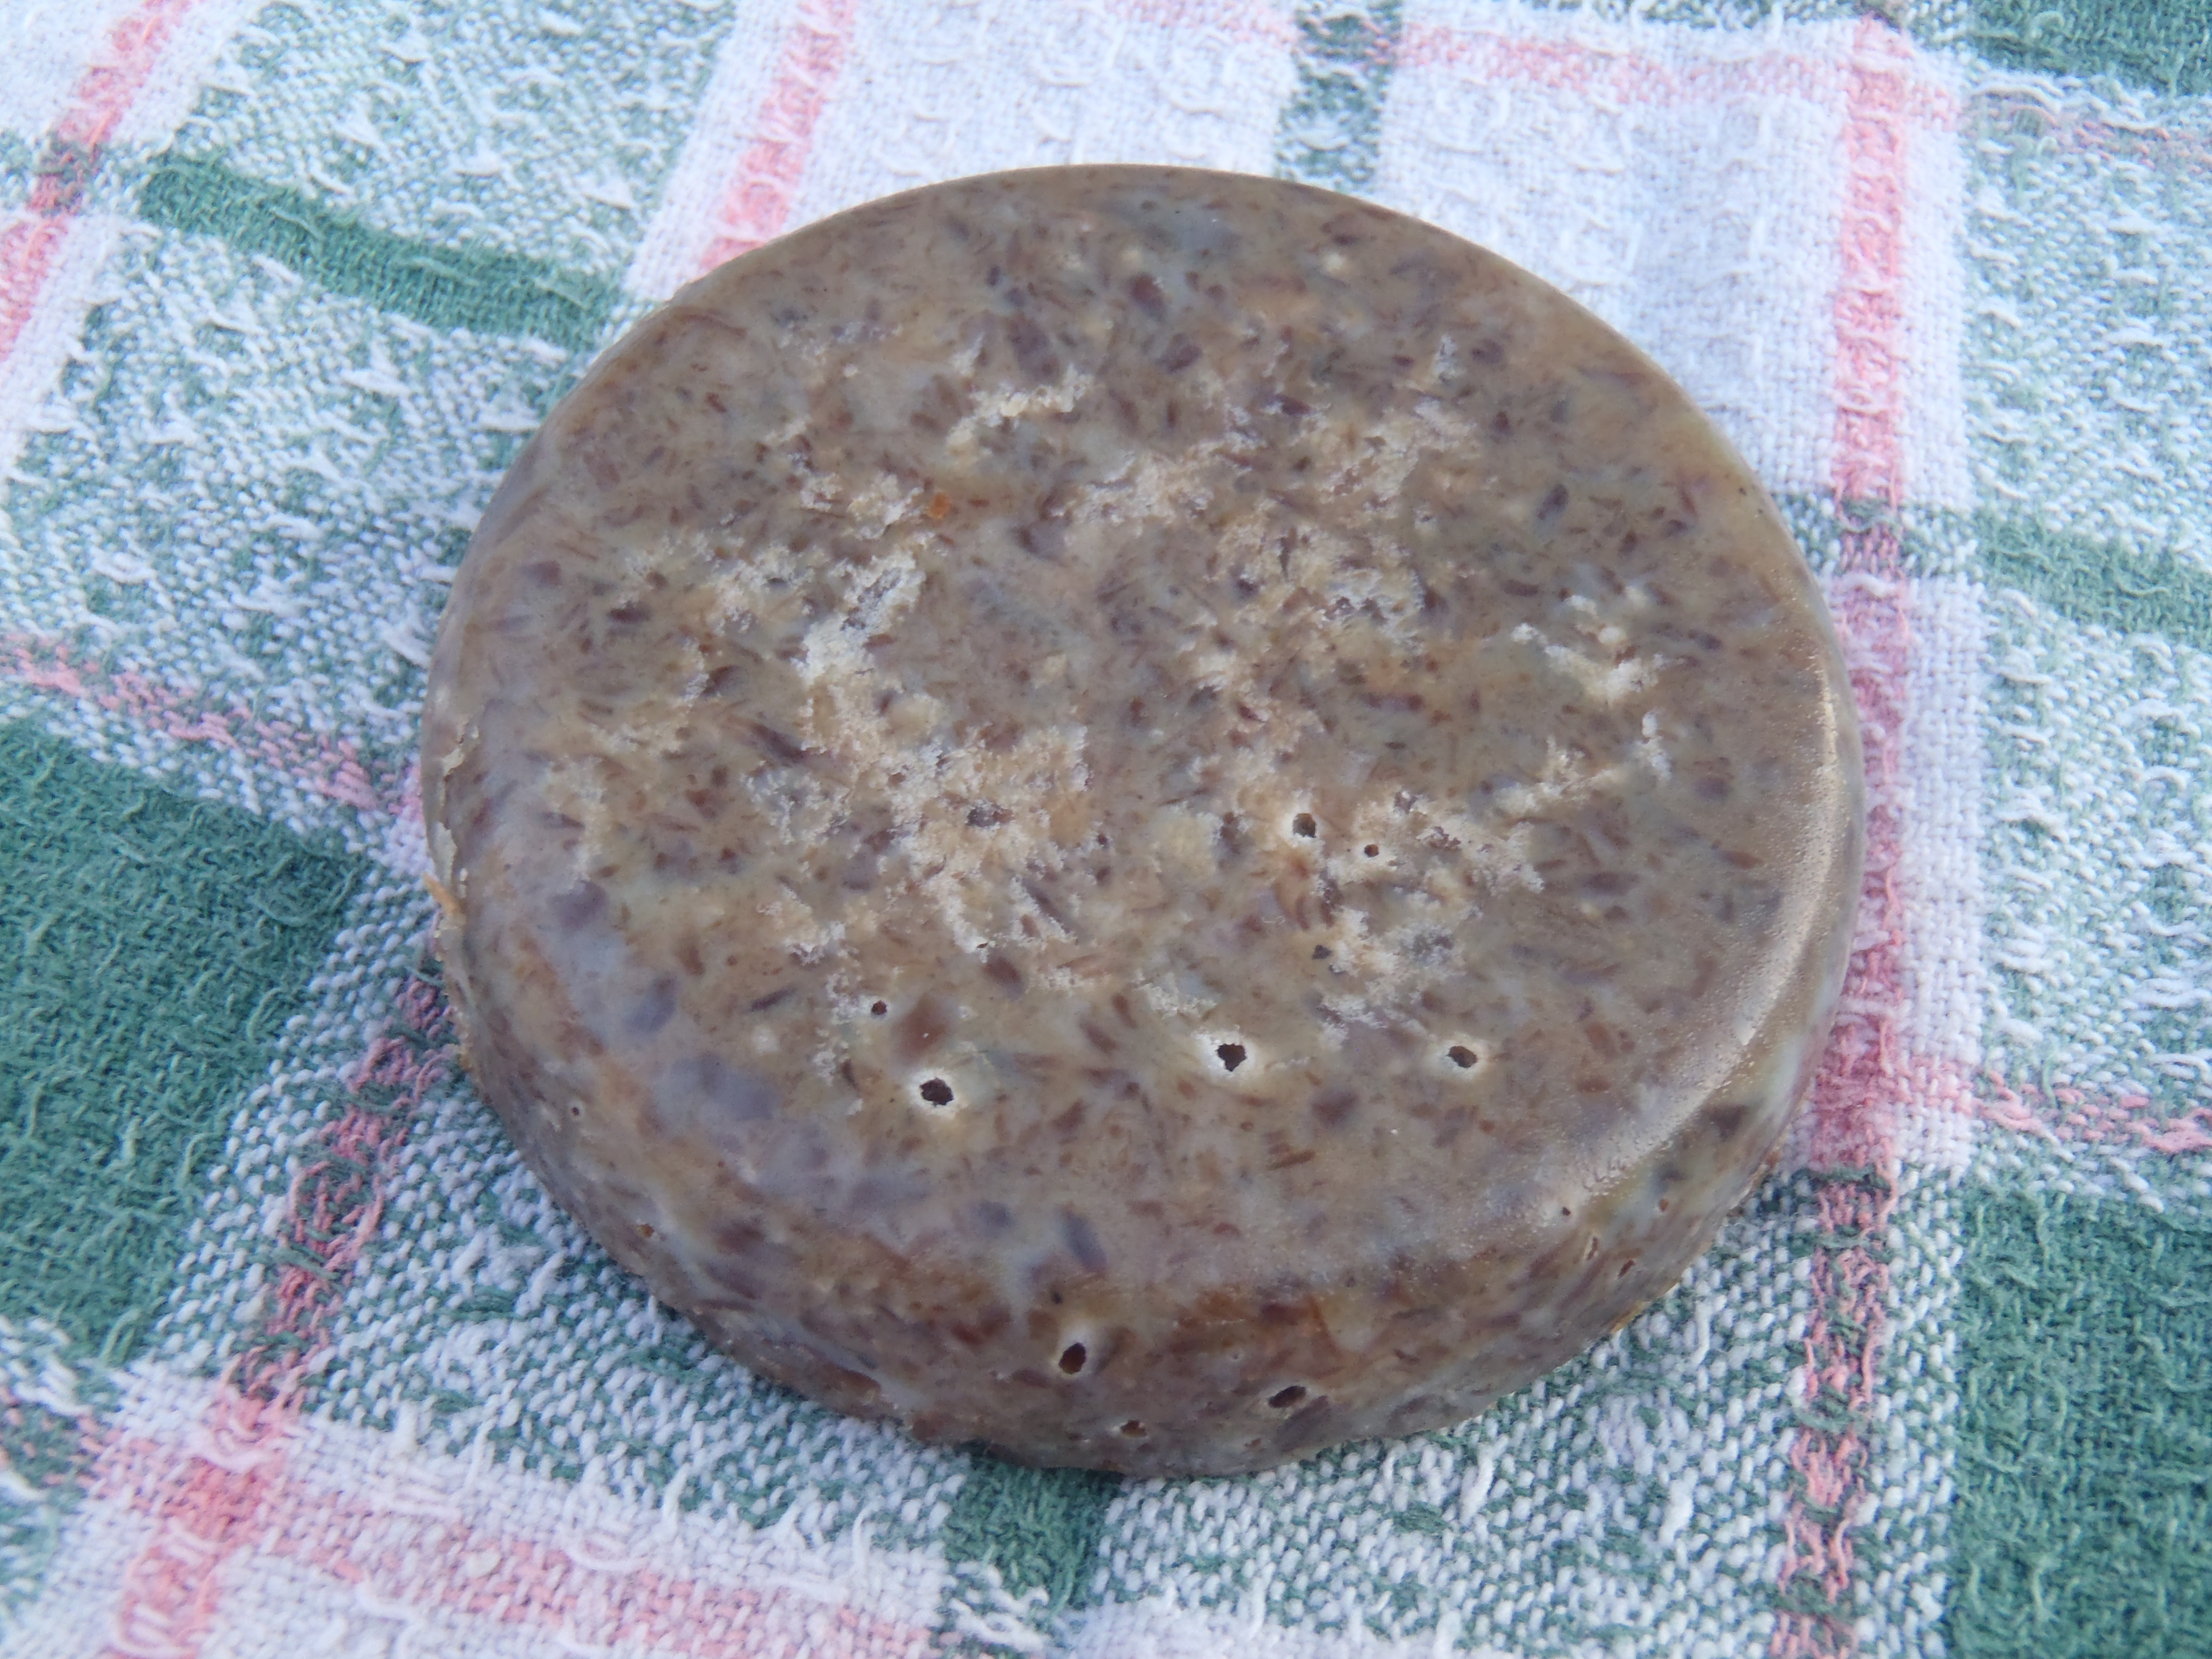 A puck of pemmican